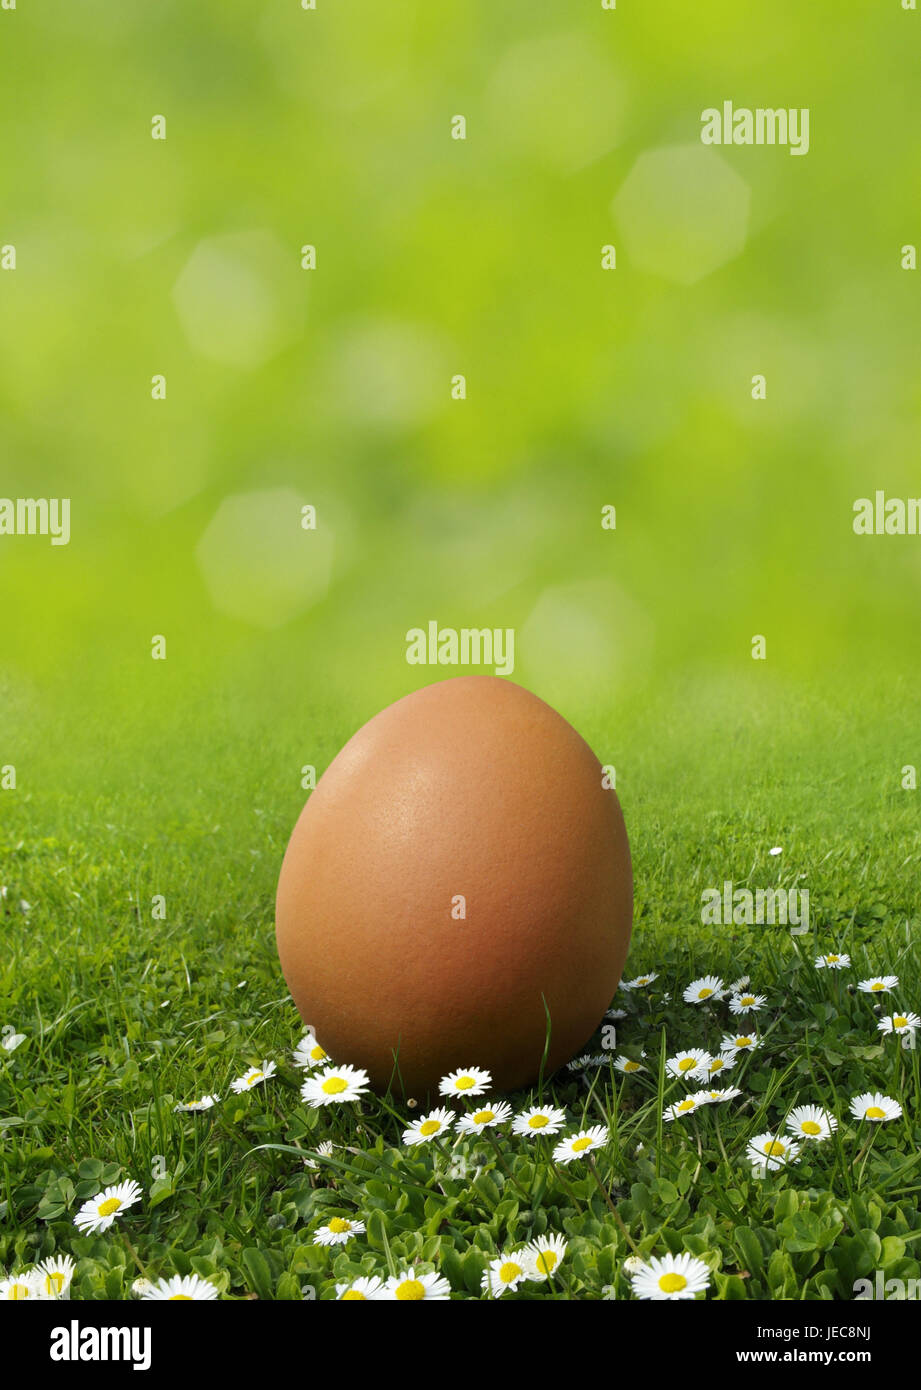 Meadow, daisy, egg, brown, grass, flower meadow, spring meadow, flowers, little flowers, Hühnerei, Vogelei, one, individually, untinted, forgotten, lost, stored, placed, season, icon, Easter egg, fertility, reproduction, spring, Easter, nature, Stock Photo